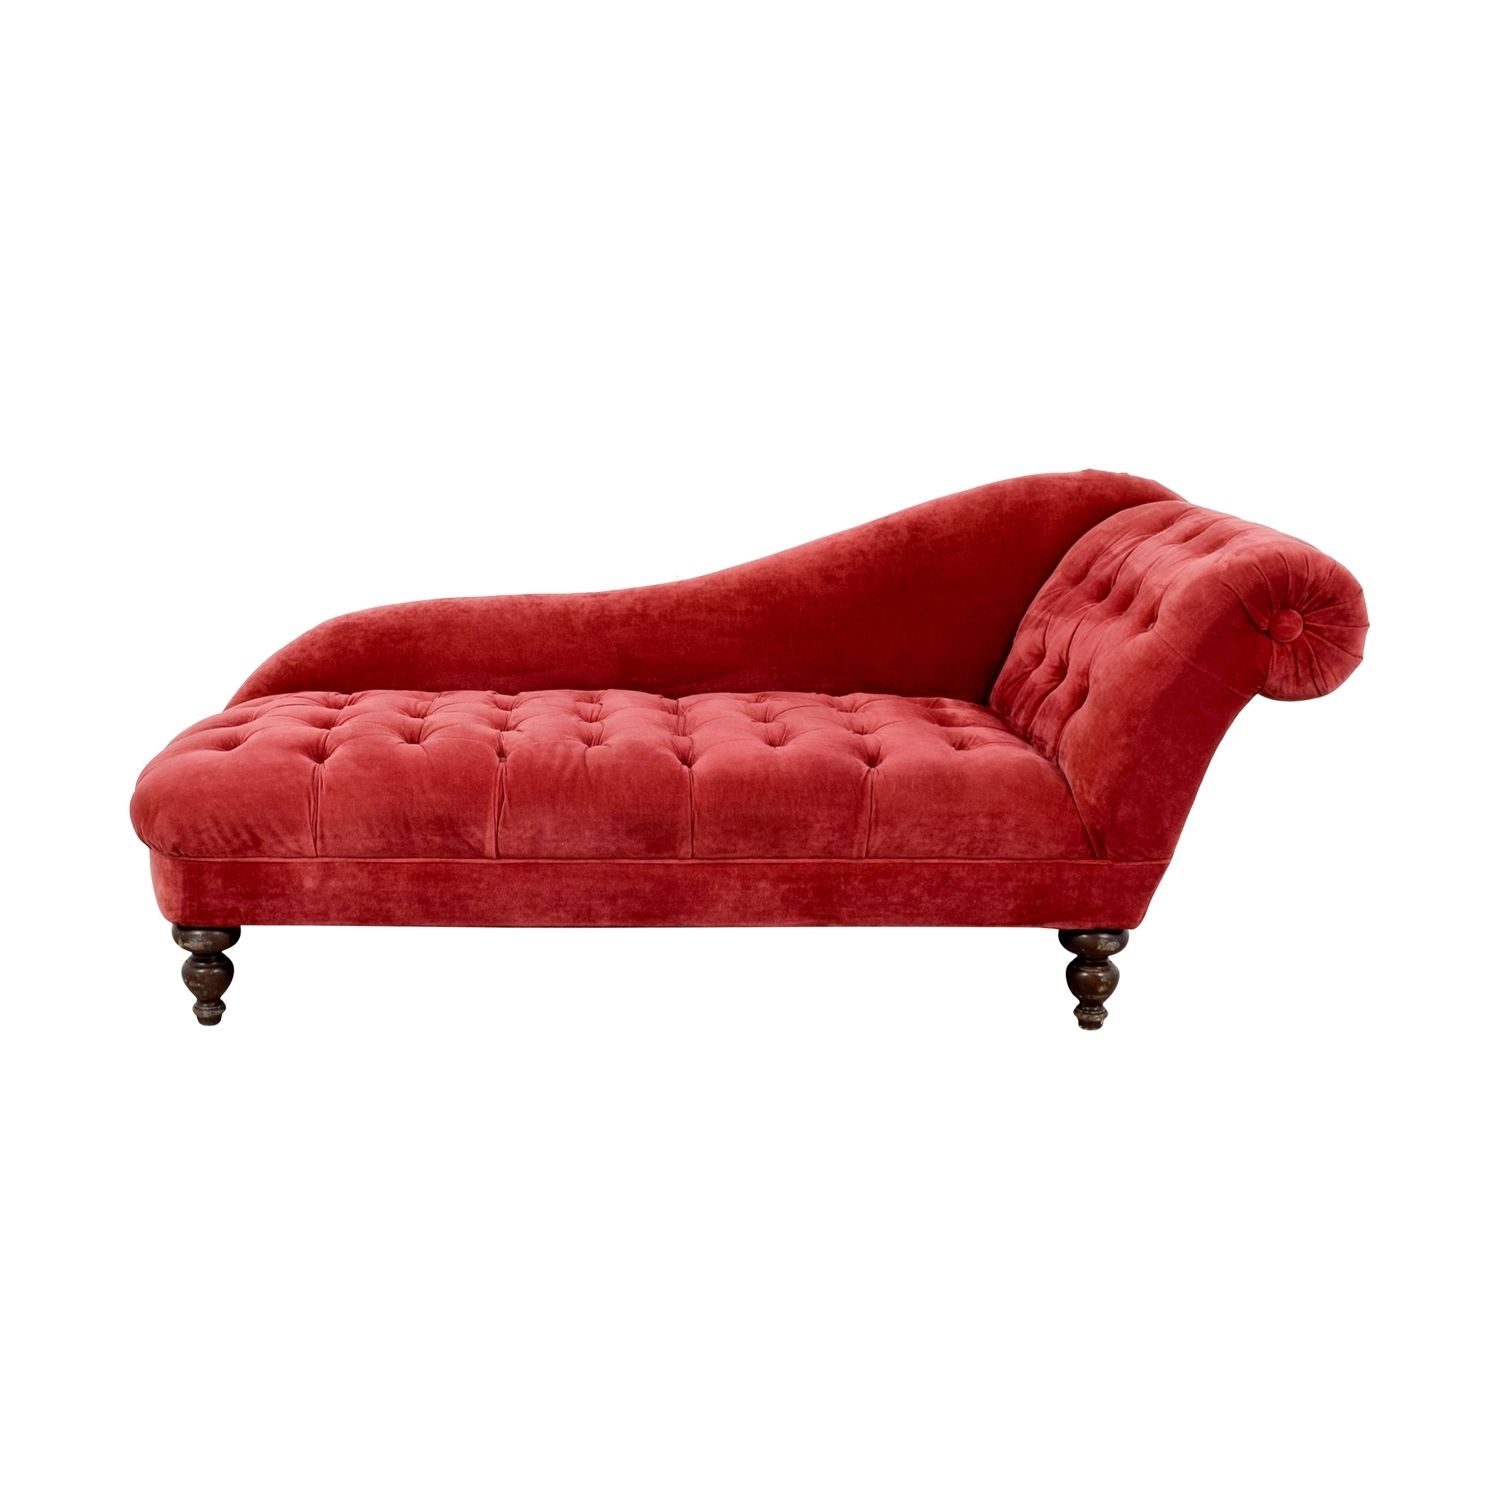 [%71% Off – Domain Home Furnishings Domain Home Furnishings Red With Regard To Most Popular Red Chaise Lounges|red Chaise Lounges Throughout Trendy 71% Off – Domain Home Furnishings Domain Home Furnishings Red|2018 Red Chaise Lounges Regarding 71% Off – Domain Home Furnishings Domain Home Furnishings Red|well Liked 71% Off – Domain Home Furnishings Domain Home Furnishings Red Inside Red Chaise Lounges%] (View 8 of 15)